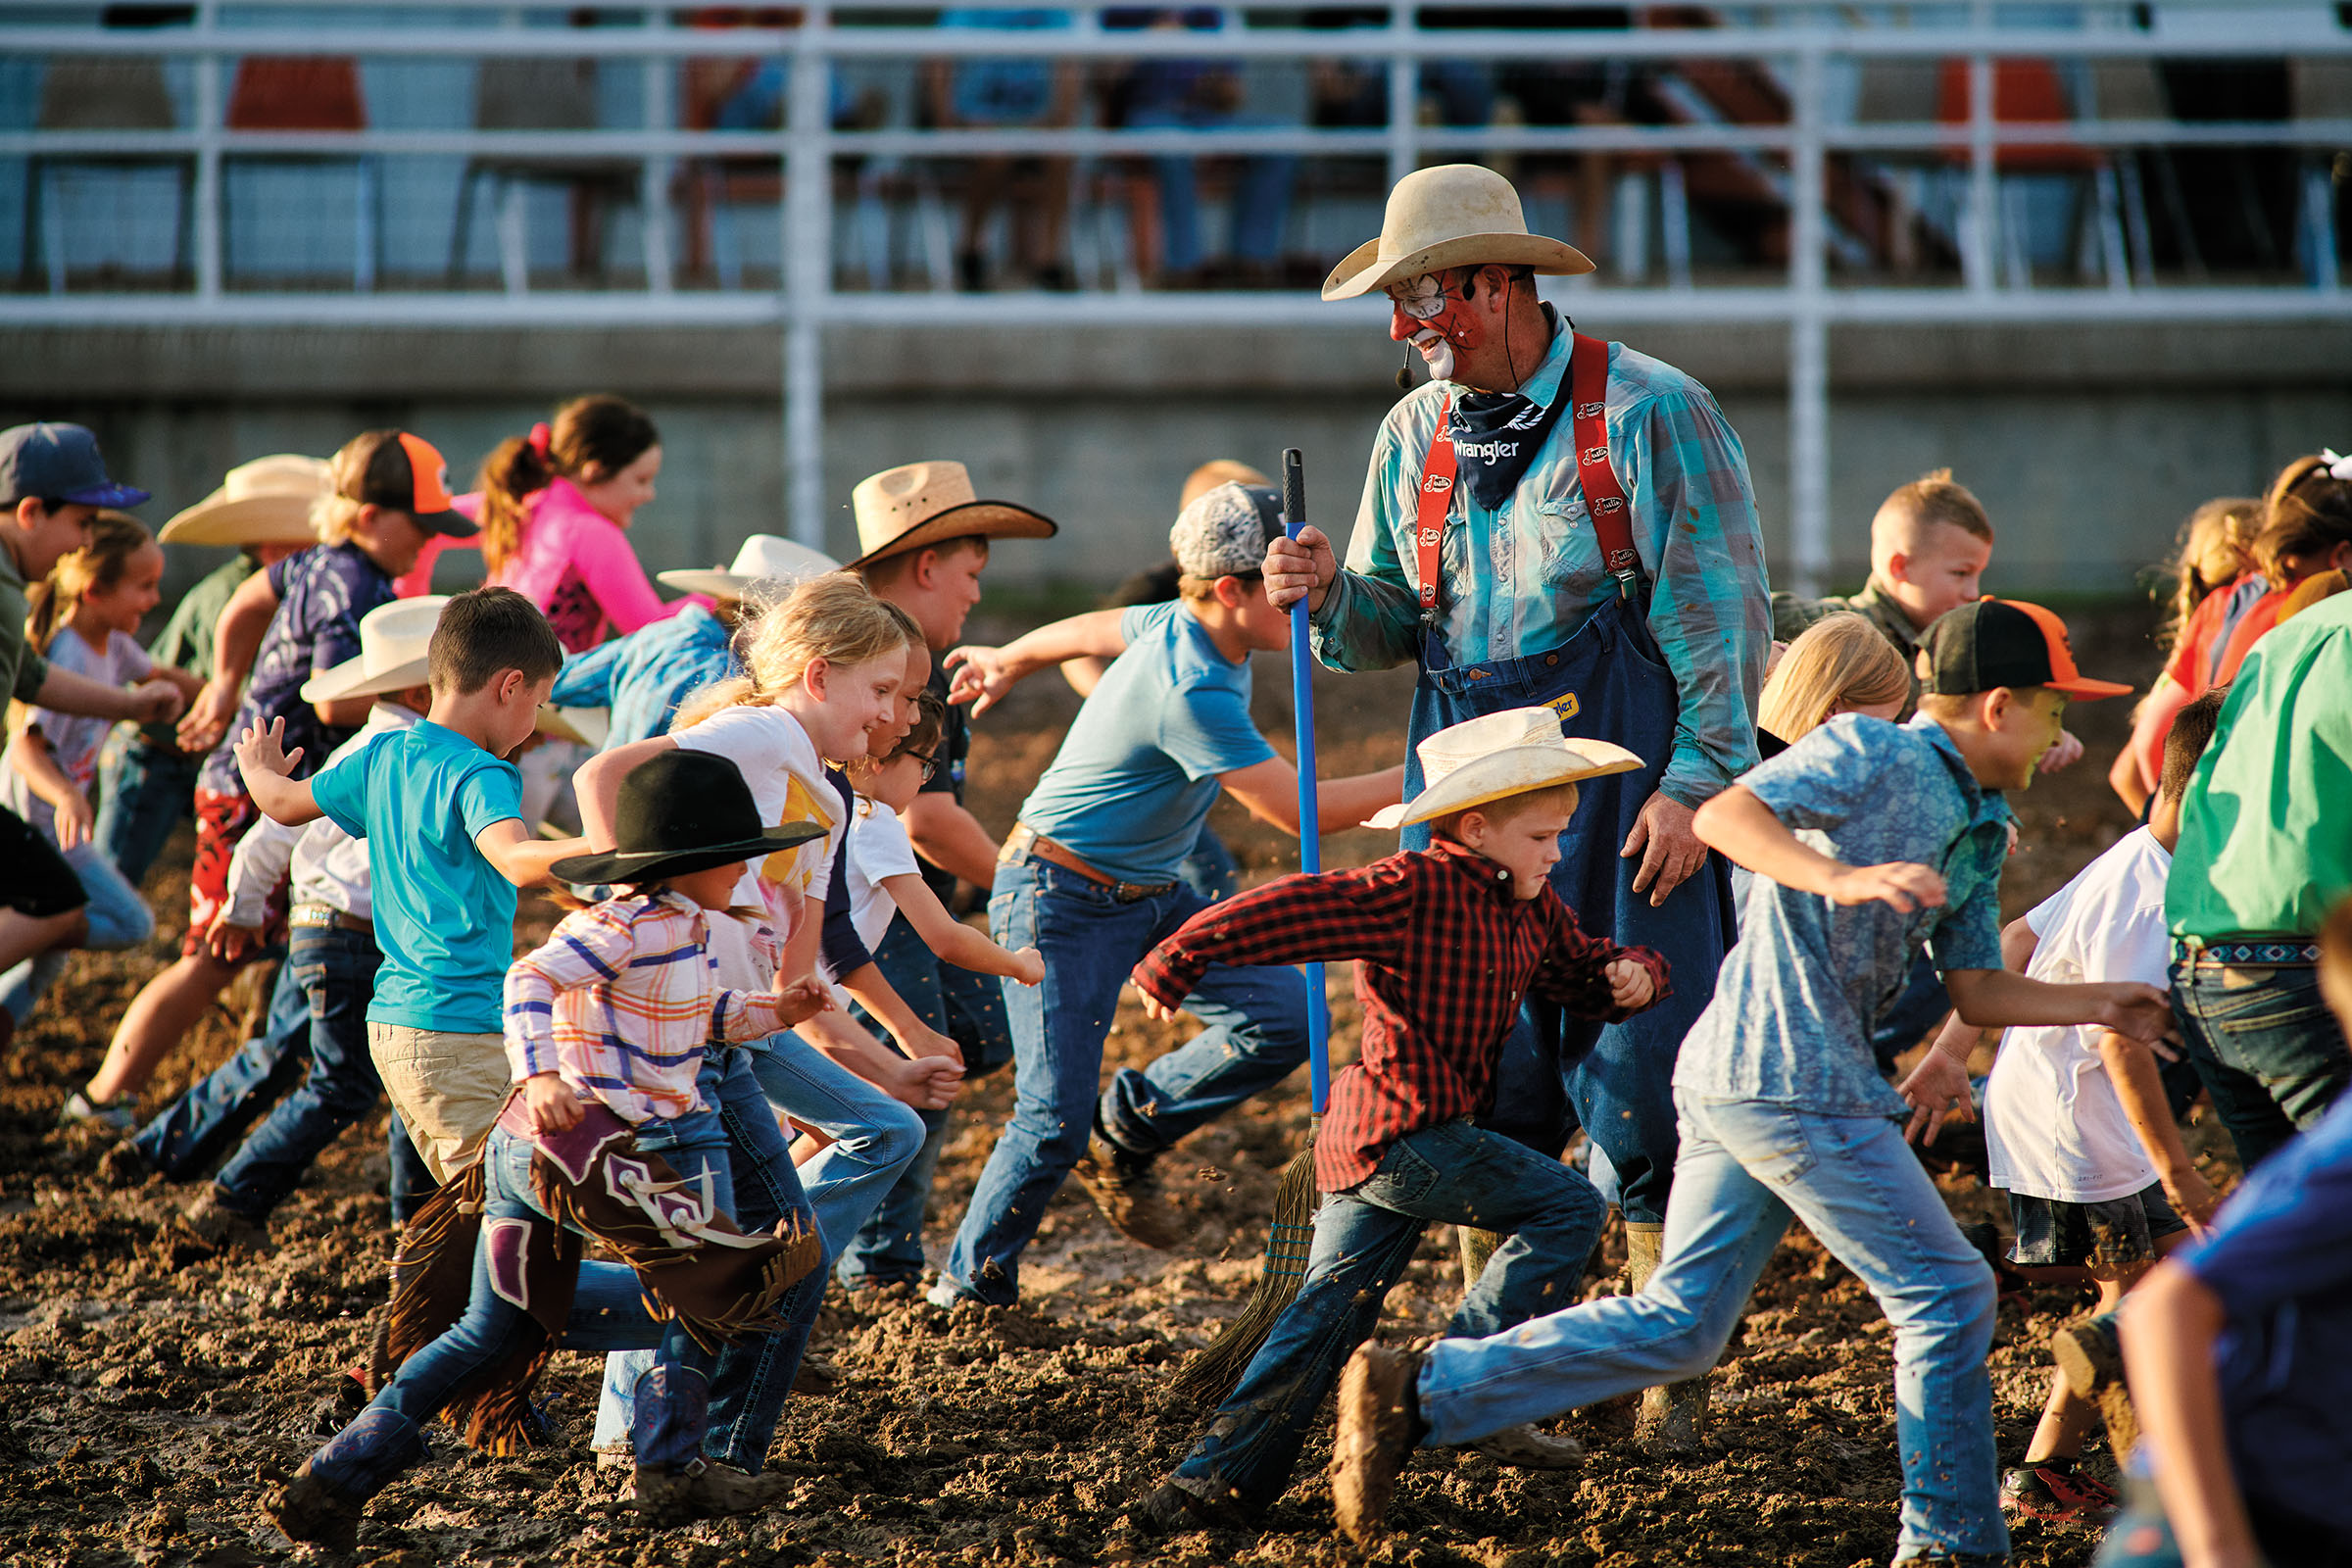 A group of children dressed in bright colors and cowboy hats run past an adult rodeo clown standing up